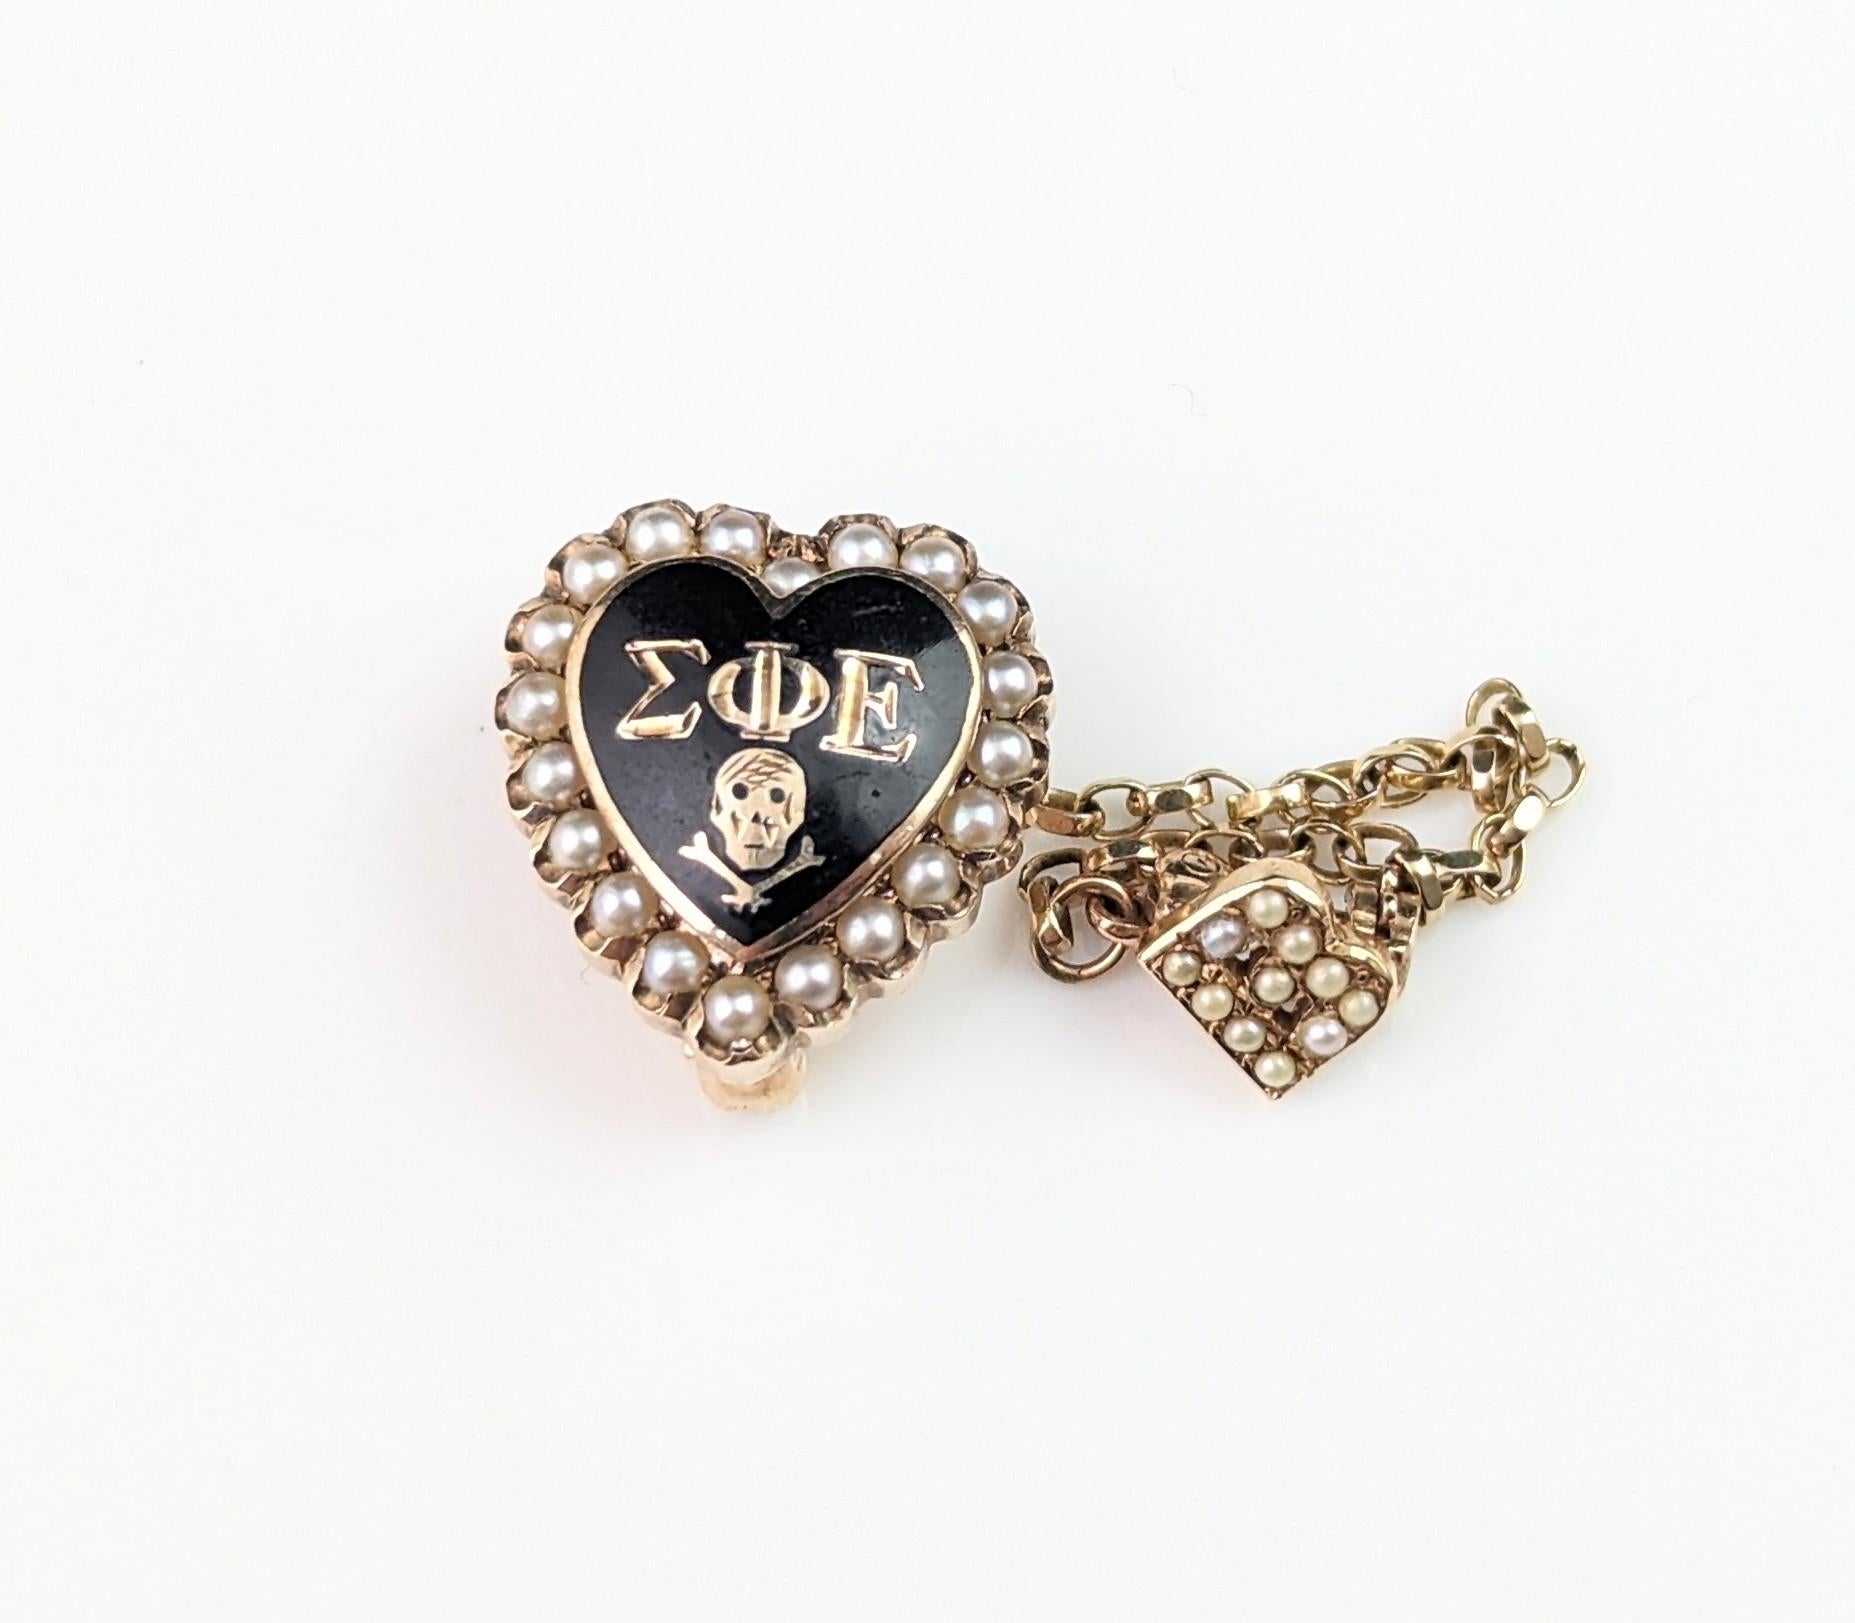 Vintage Fraternity brooch, Heart, Skull and Crossbones, 10k gold and Pearl  6